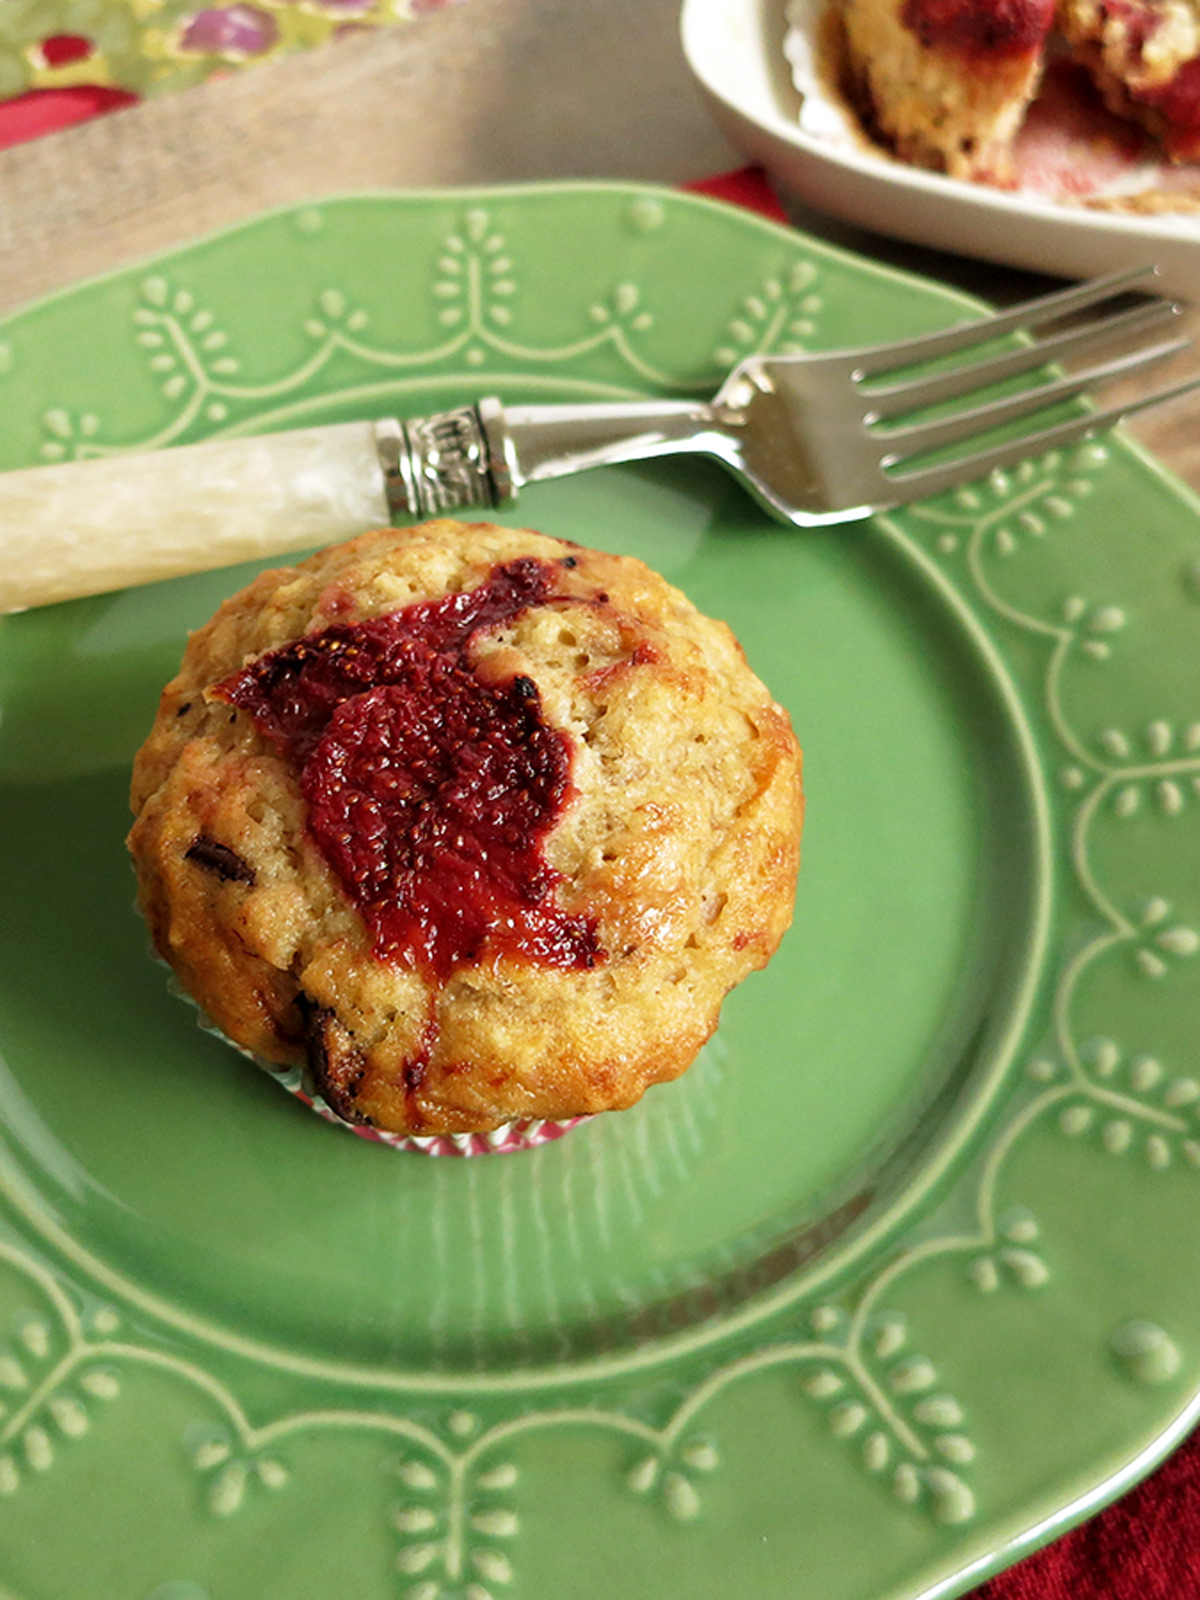 Roasted strawberry muffin on a green plate with a fork and another muffin on a white plate in the background.